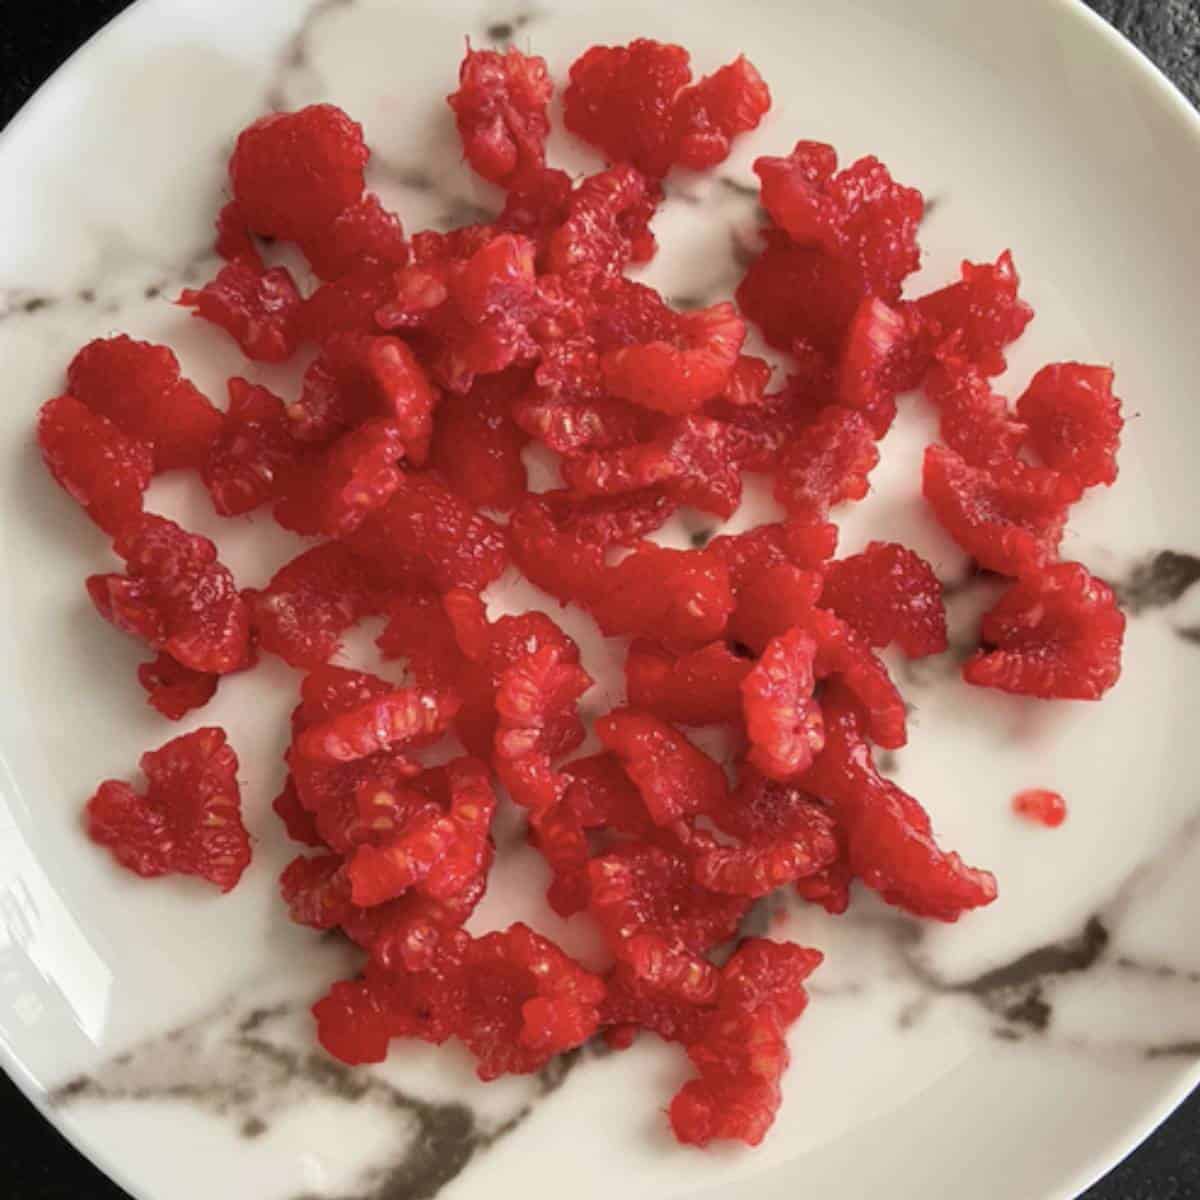 Raspberries ripped into smaller pieces on plate.